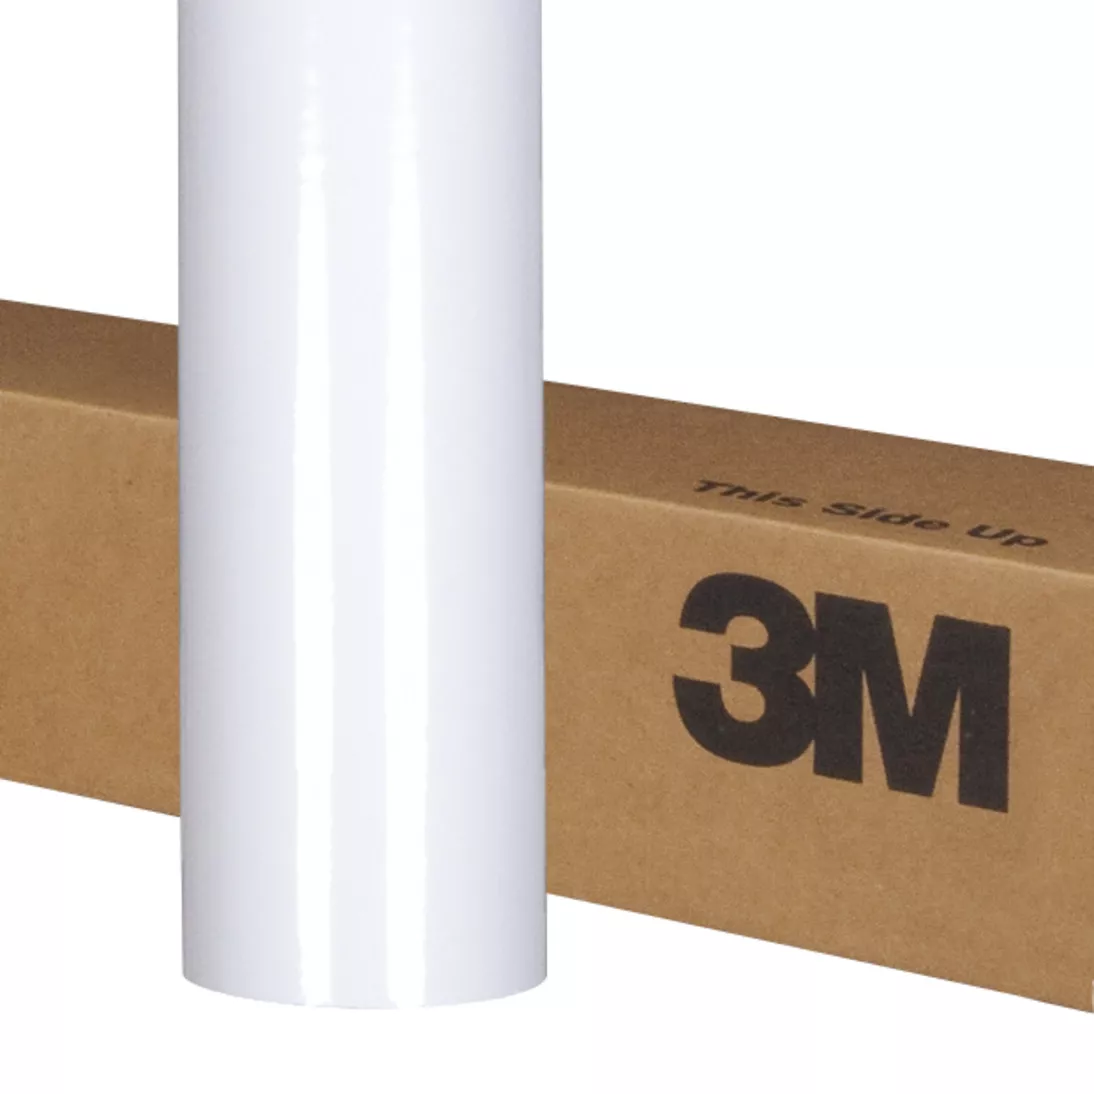 3M™ Controltac™ Graphic Film With Comply™ Adhesive IJ160C-10, White, 48
in x 100 yd